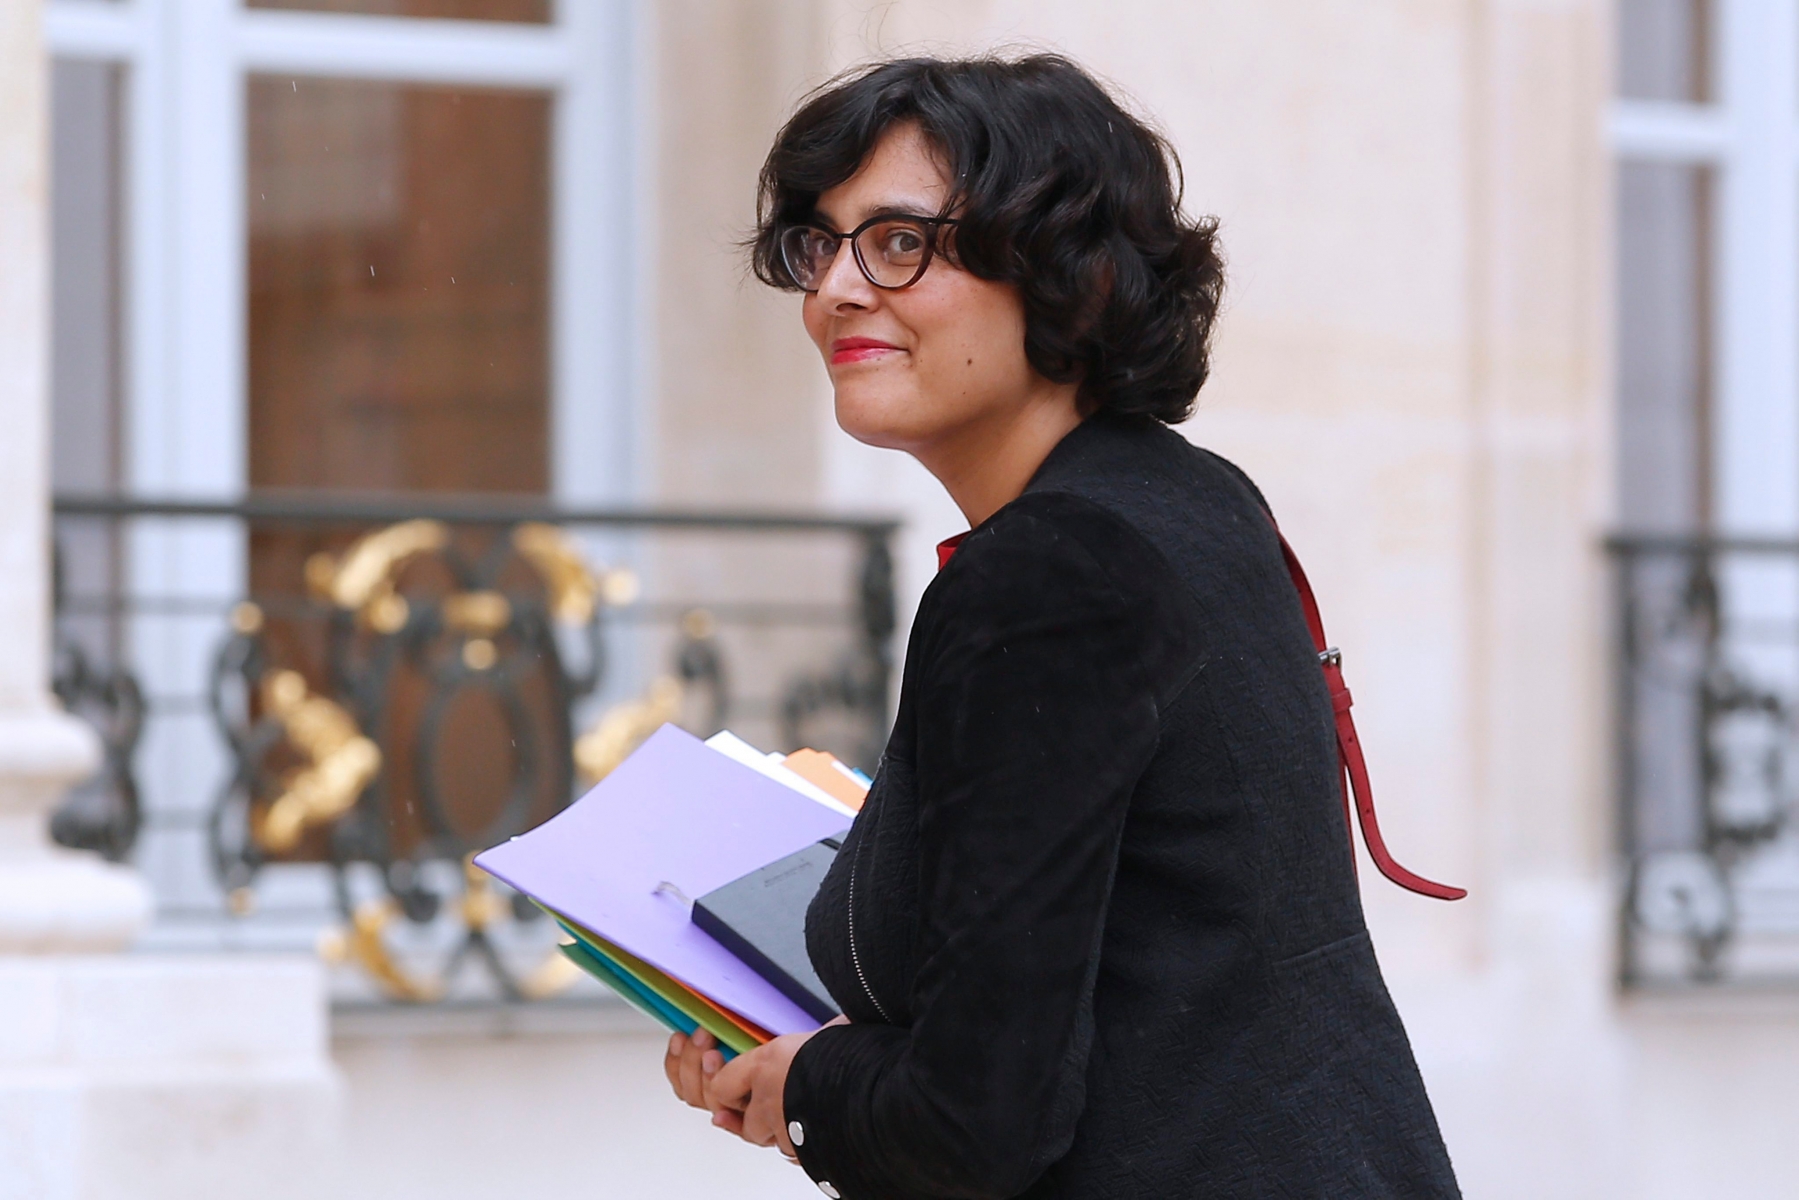 epa05297805 French Labour Minister Myriam el Khomri arrives at the Elysee Palace to attend an extraordinary Cabinet Meeting in Paris, France, 10 May 2016. The French Council of Ministers has authorized the French Prime Minister Manuel Valls to use the 49.3 article of the French constitution to pass the controversial labor reform law at Parliament. Article 49.3 of the French constitution authorizes the government to pass a bill without putting it for a vote at the French Parliament afterwards and it engages the responsibility of the government if ever the 49.3 is censored and forced to be voted and denied.  EPA/YOAN VALAT FRANCE LABOR